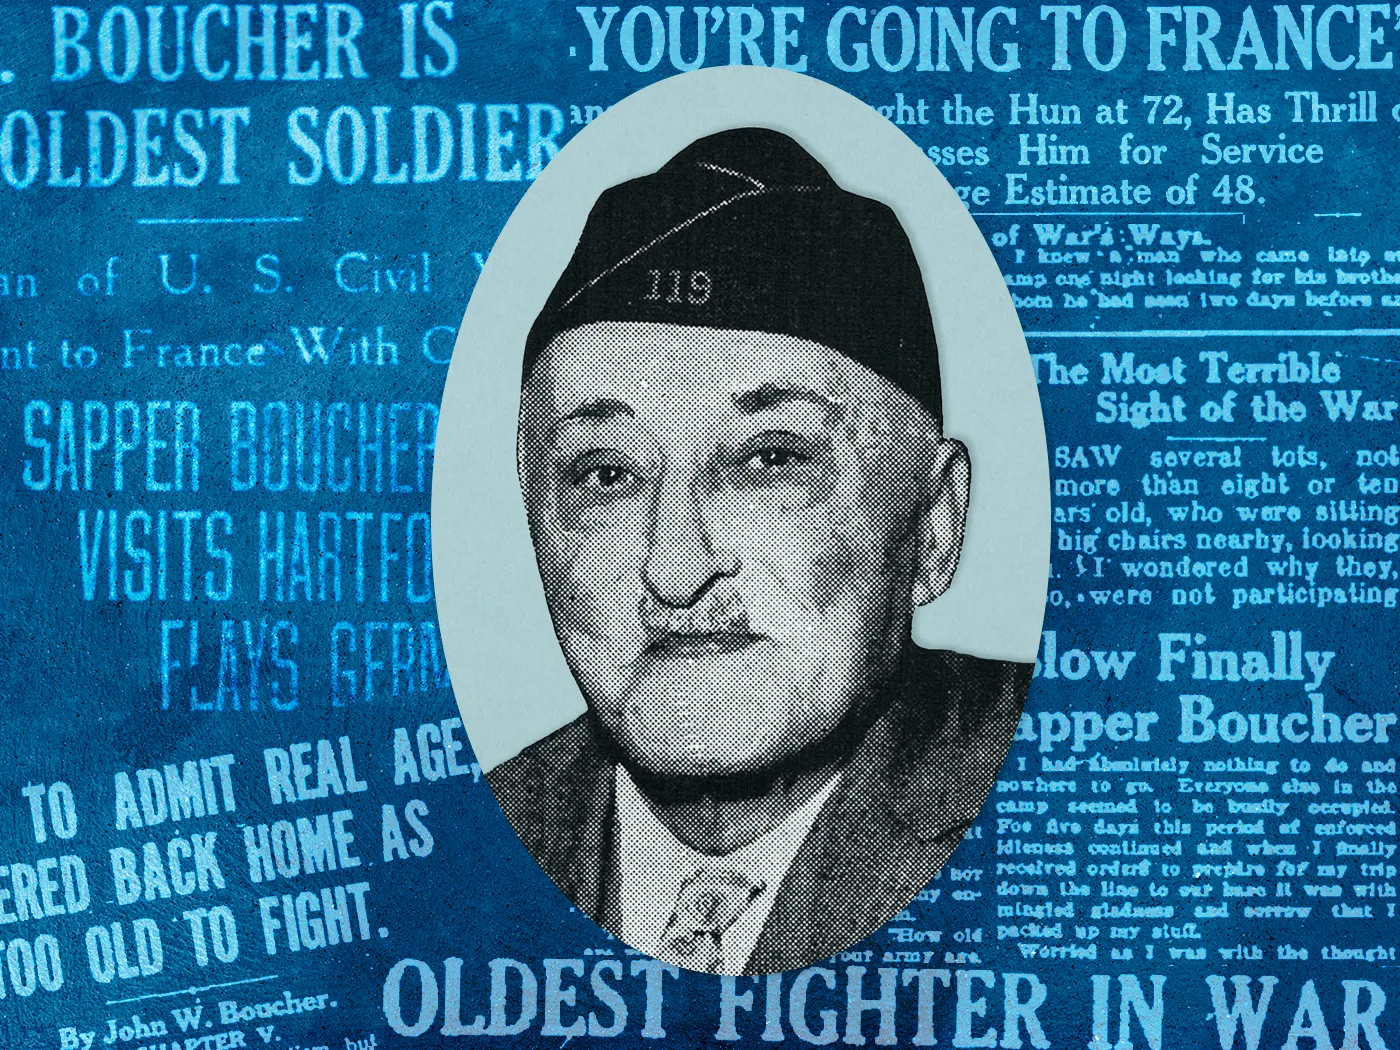 The 72-Year-Old Who Lied About His Age to Fight in World War I